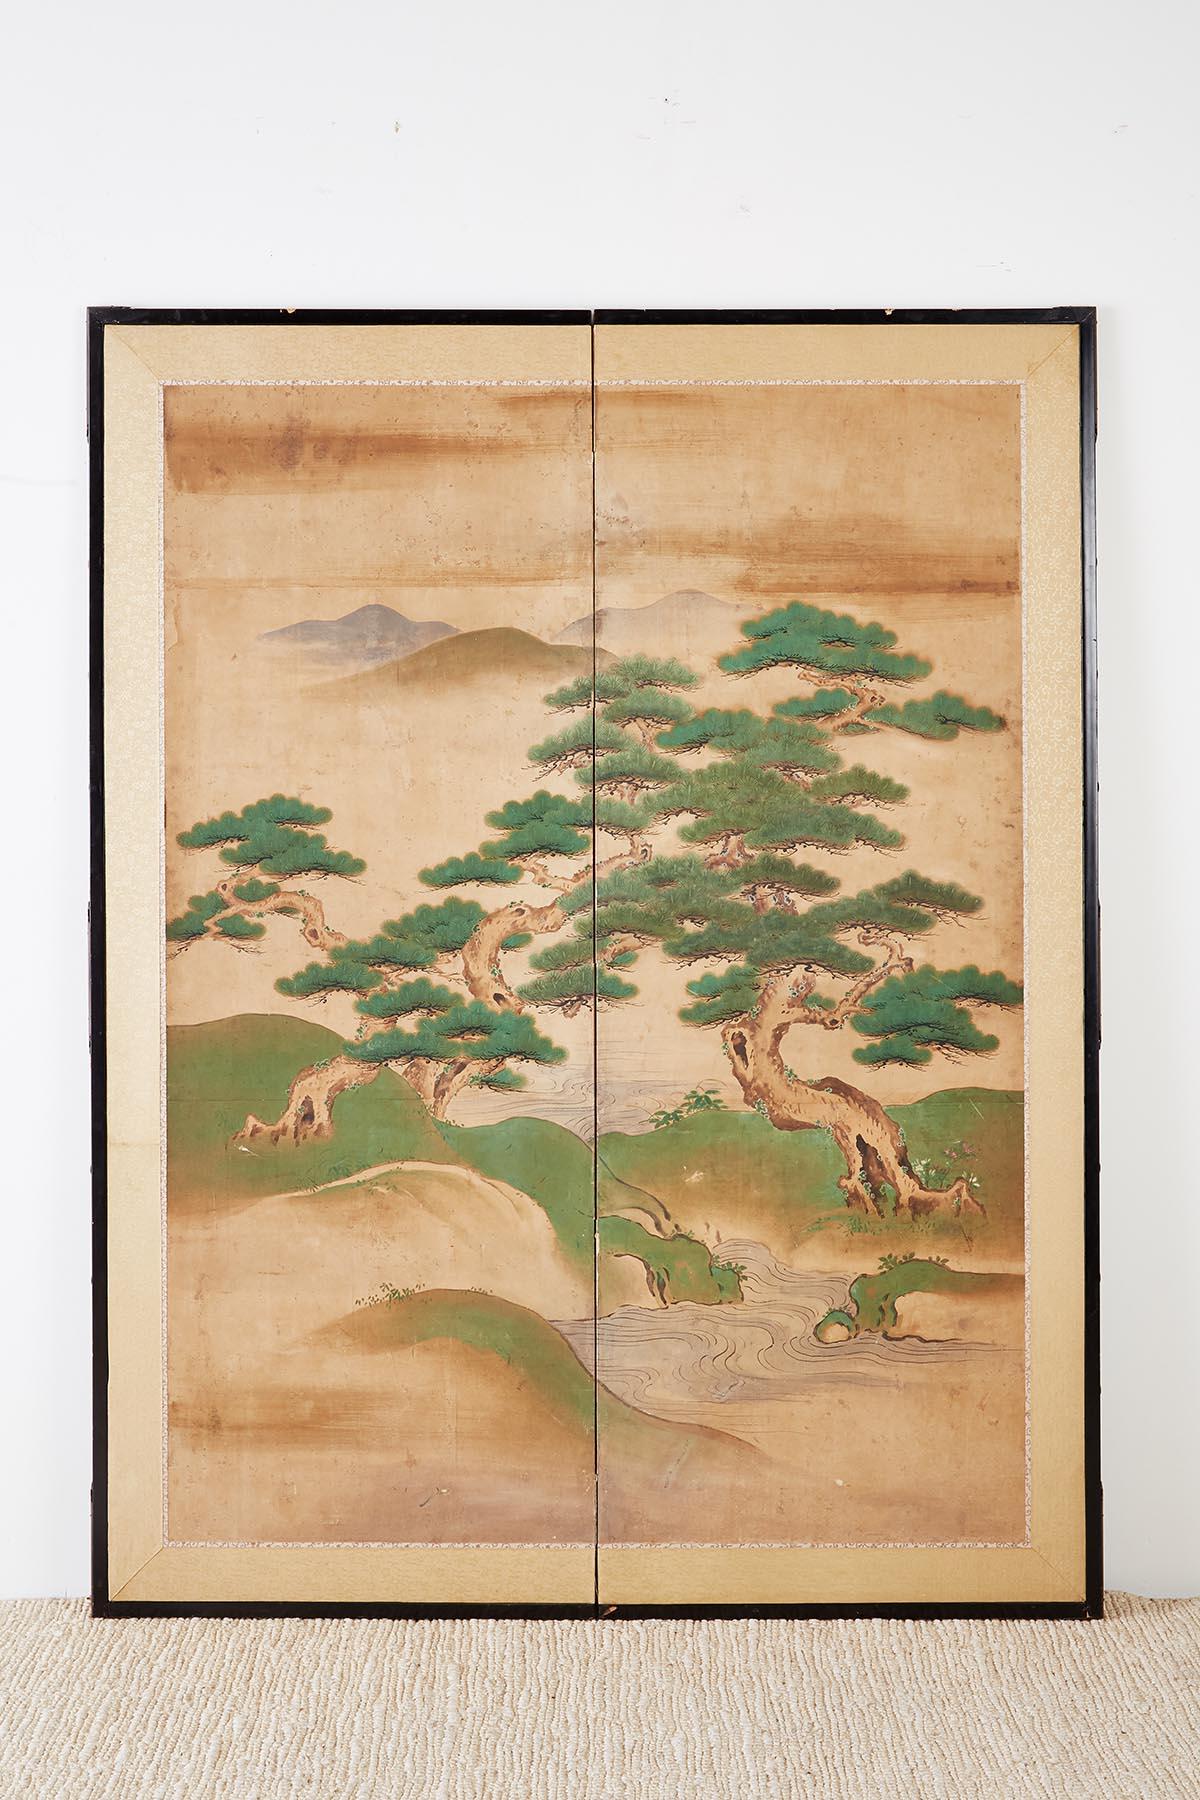 Large late 18th century Japanese two-panel Kano school screen from Edo period. Two large pine trees over a river with mountains in the background. Set with a silk brocade border in an ebonized wood frame. Minor wear and staining on front with losses